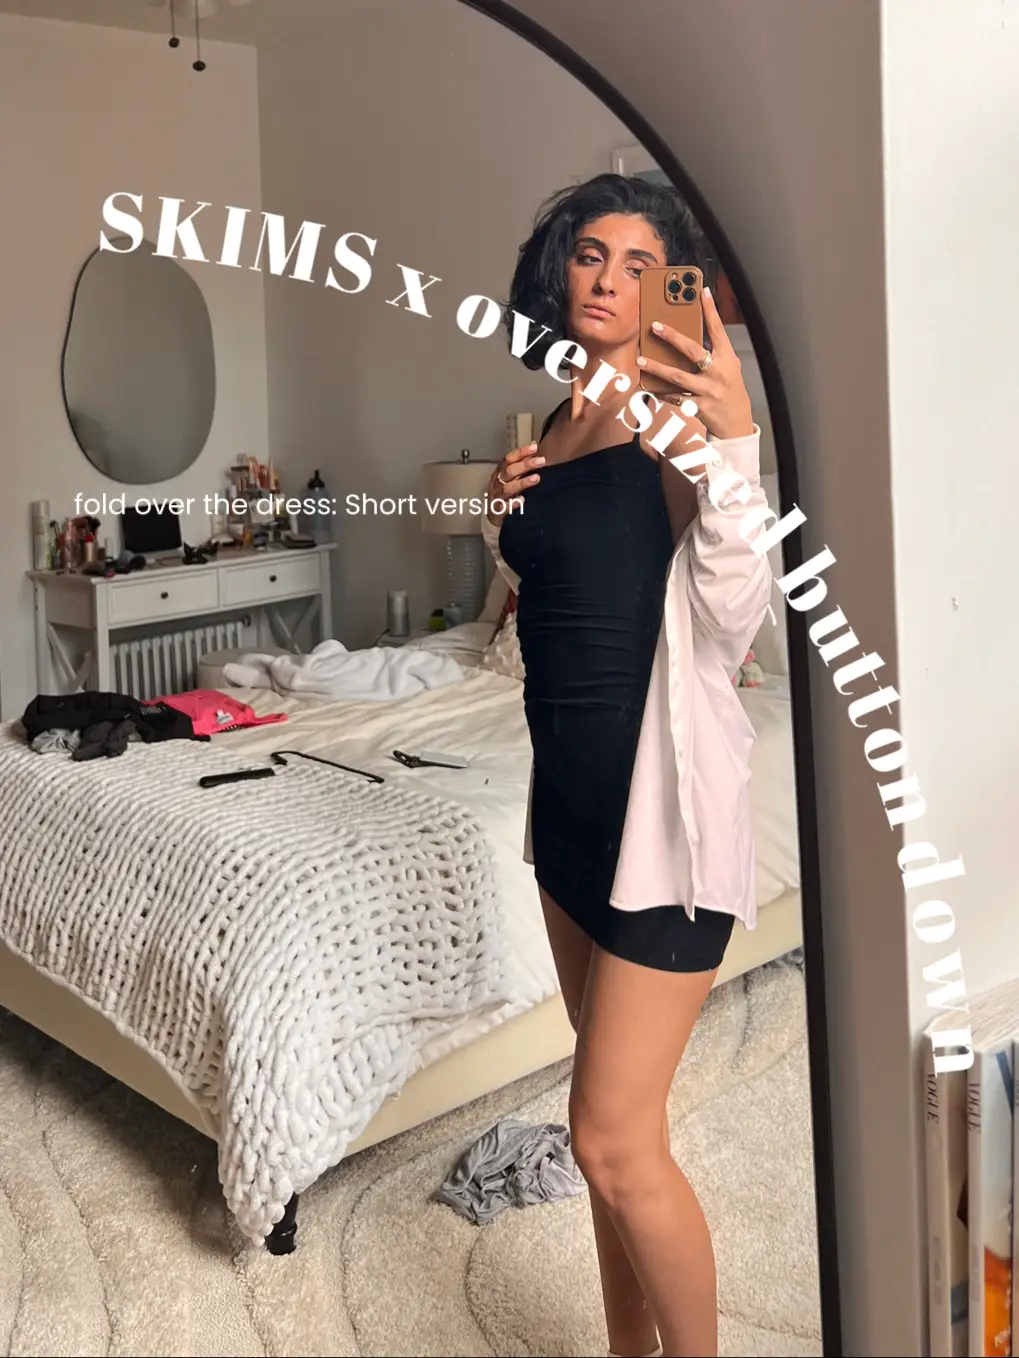 SKIMS DRESS: A LOOK, Gallery posted by Julia